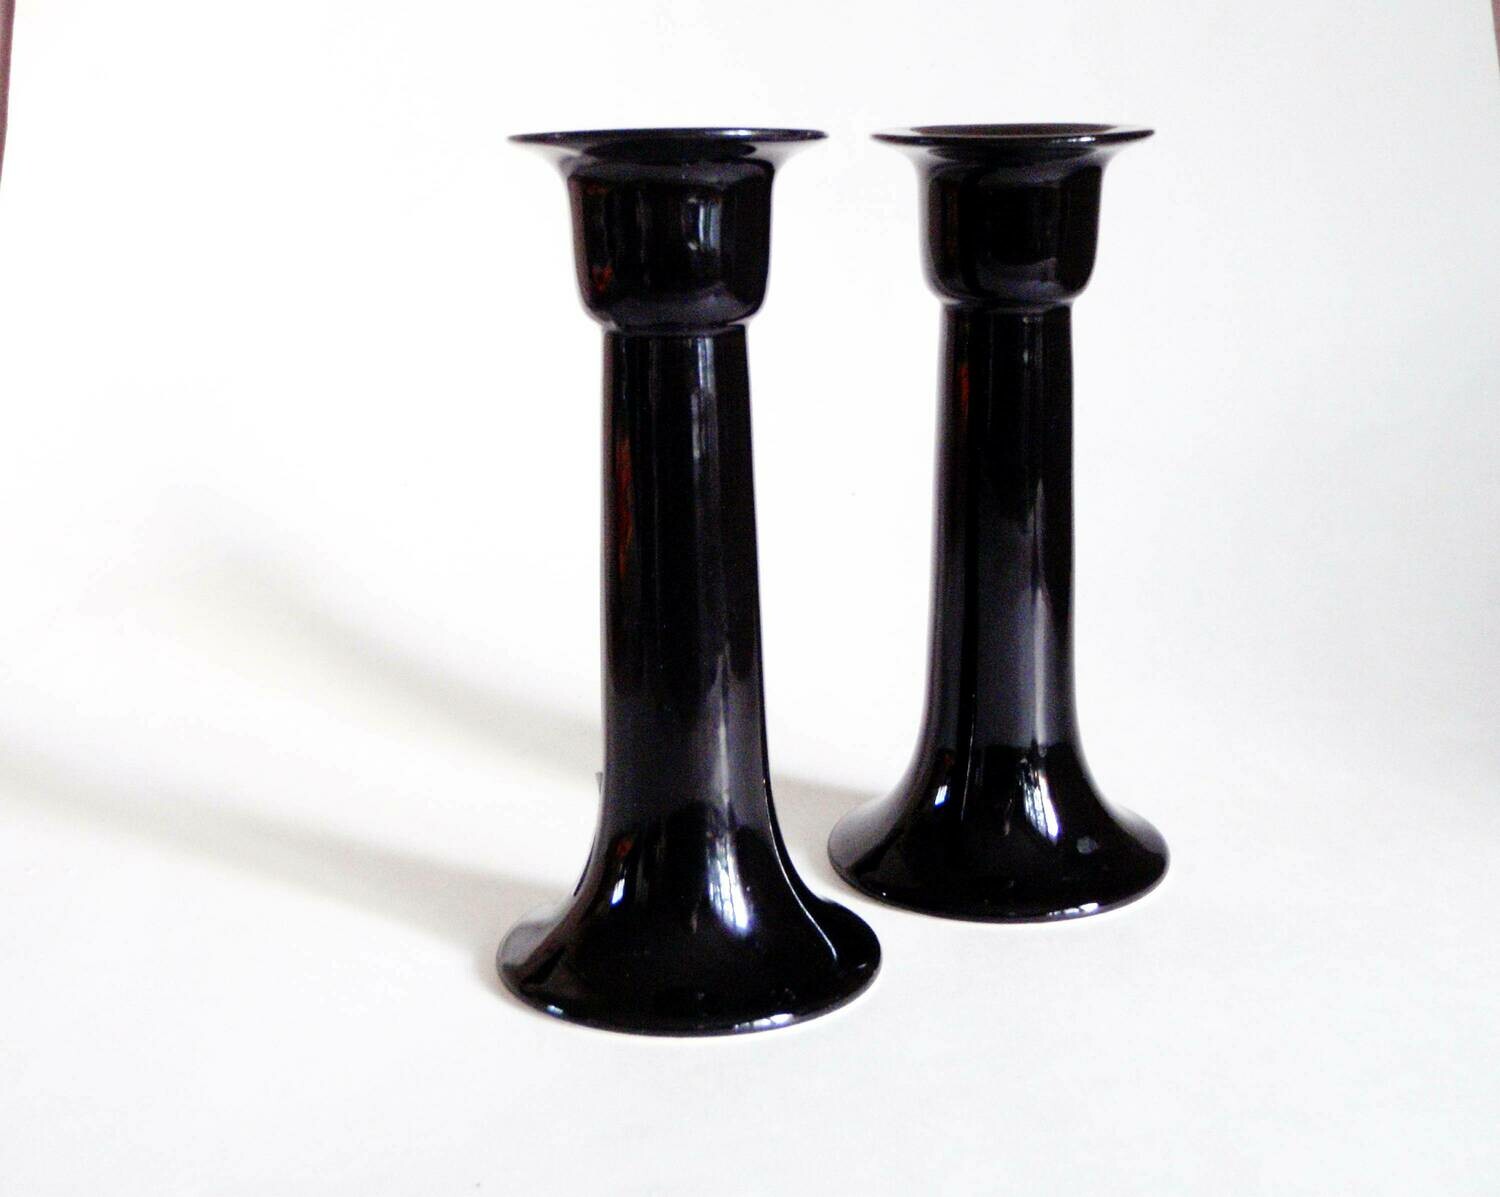 Finnish Ceramic 7 1/4 Inch Candle Holders
